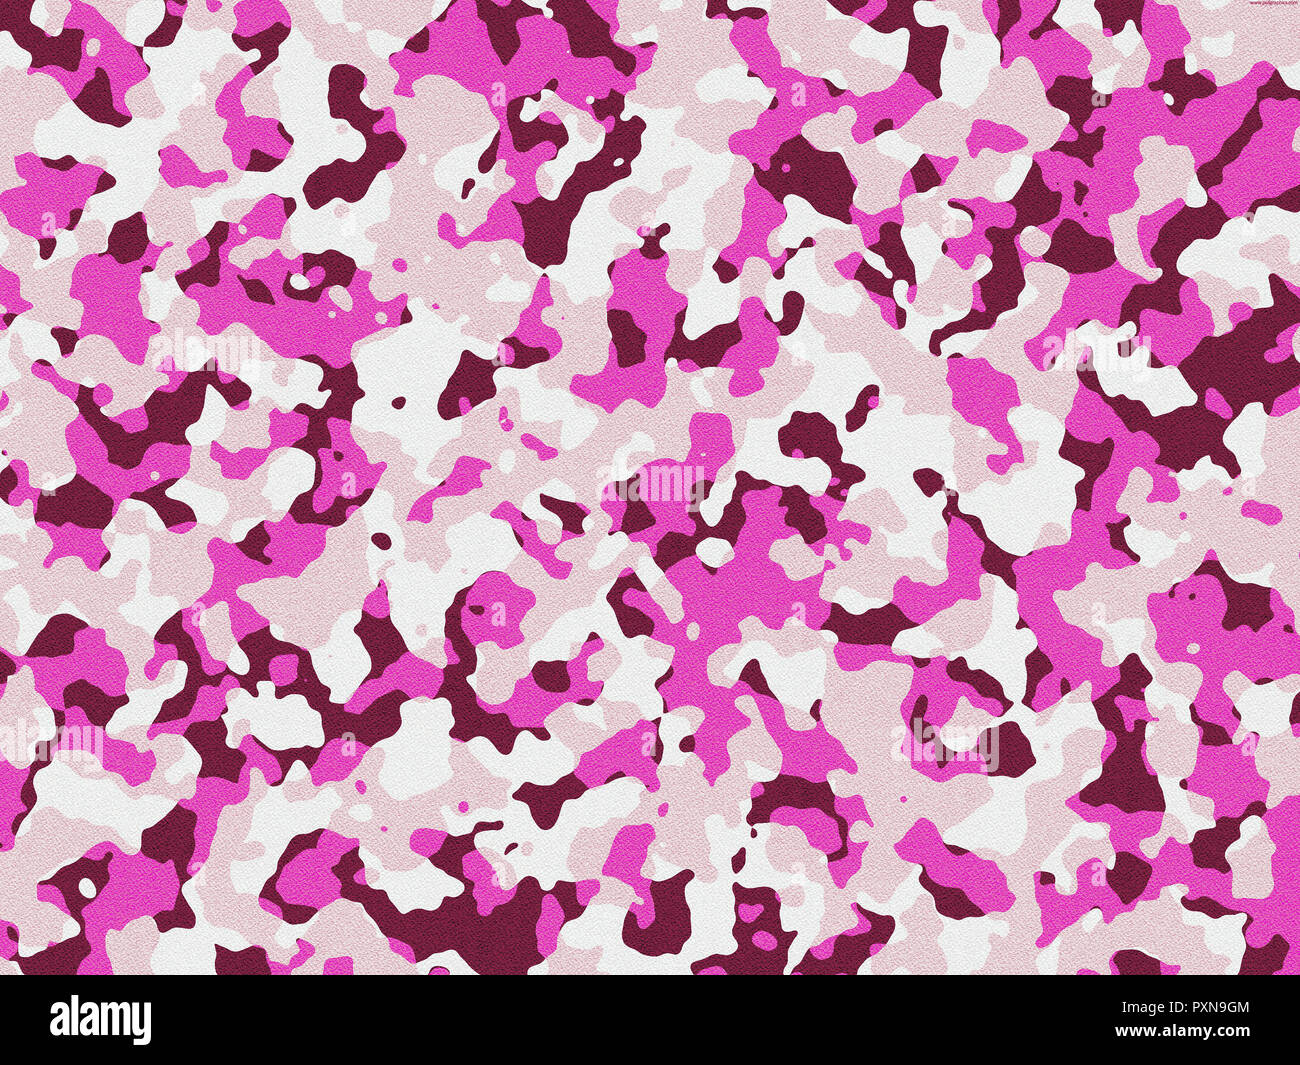 Textured pink and beige camouflage pattern Stock Photo